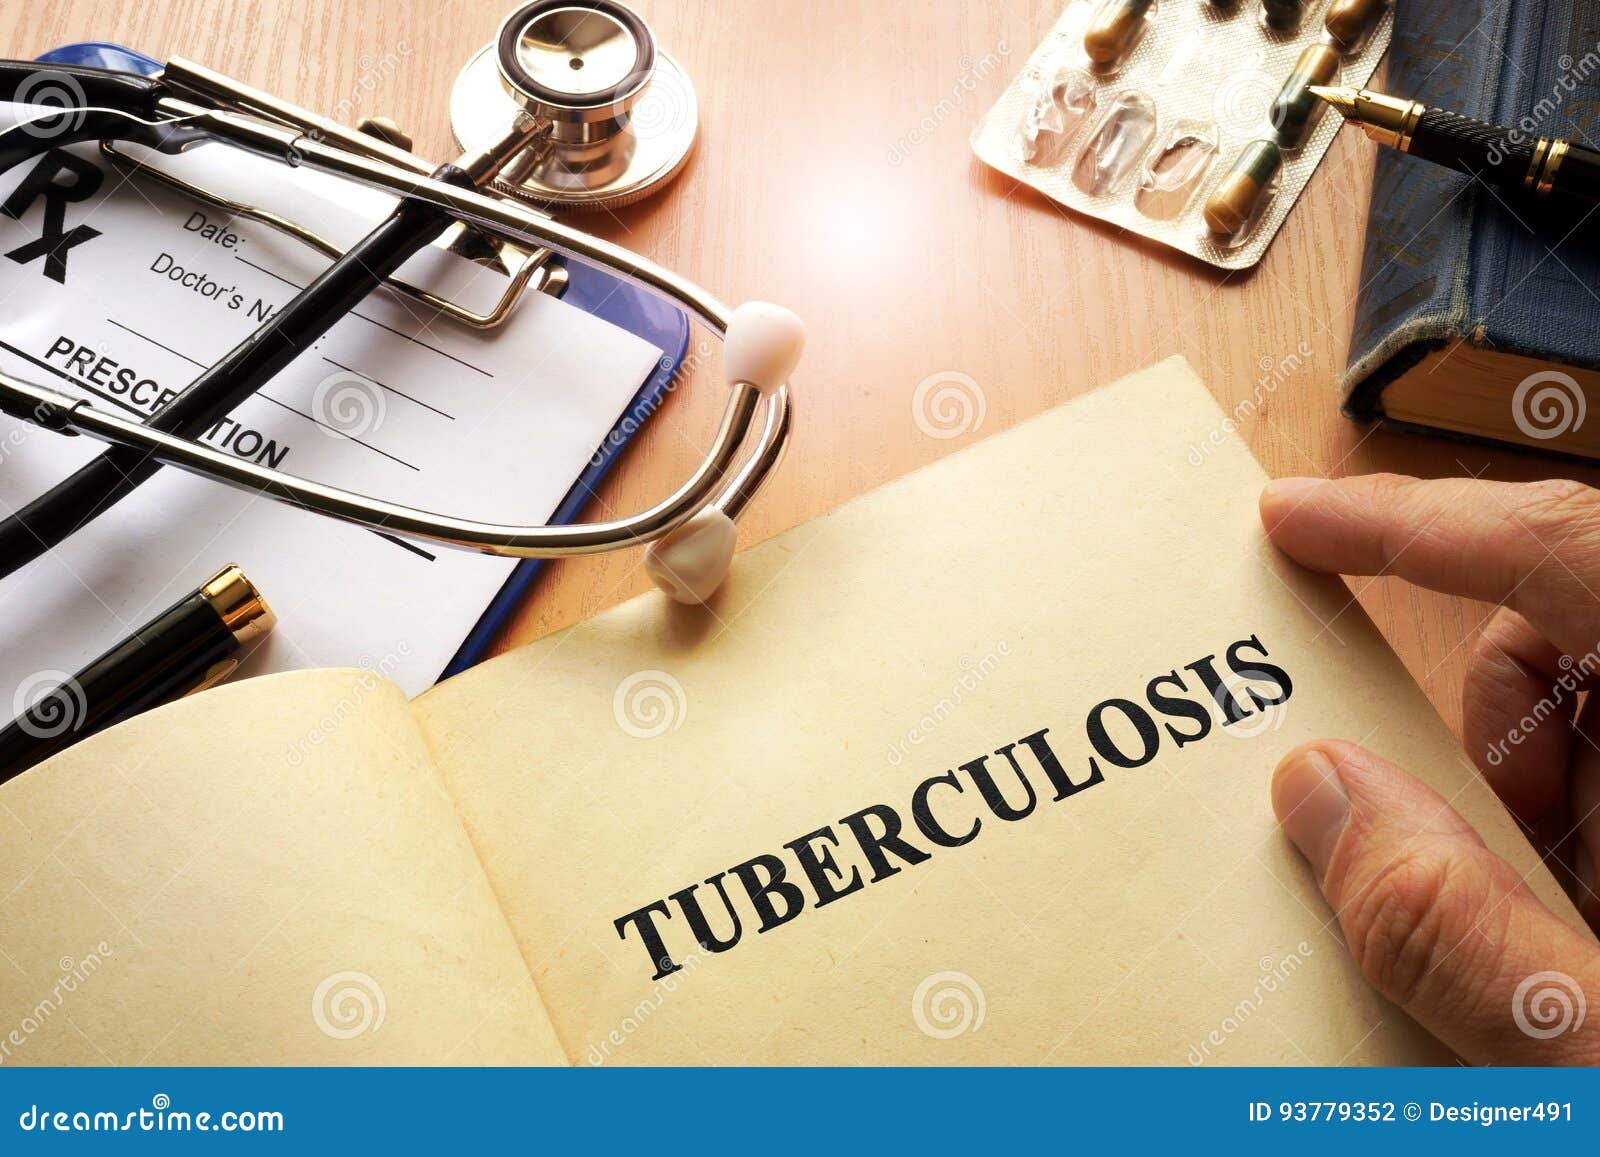 book with title tuberculosis.